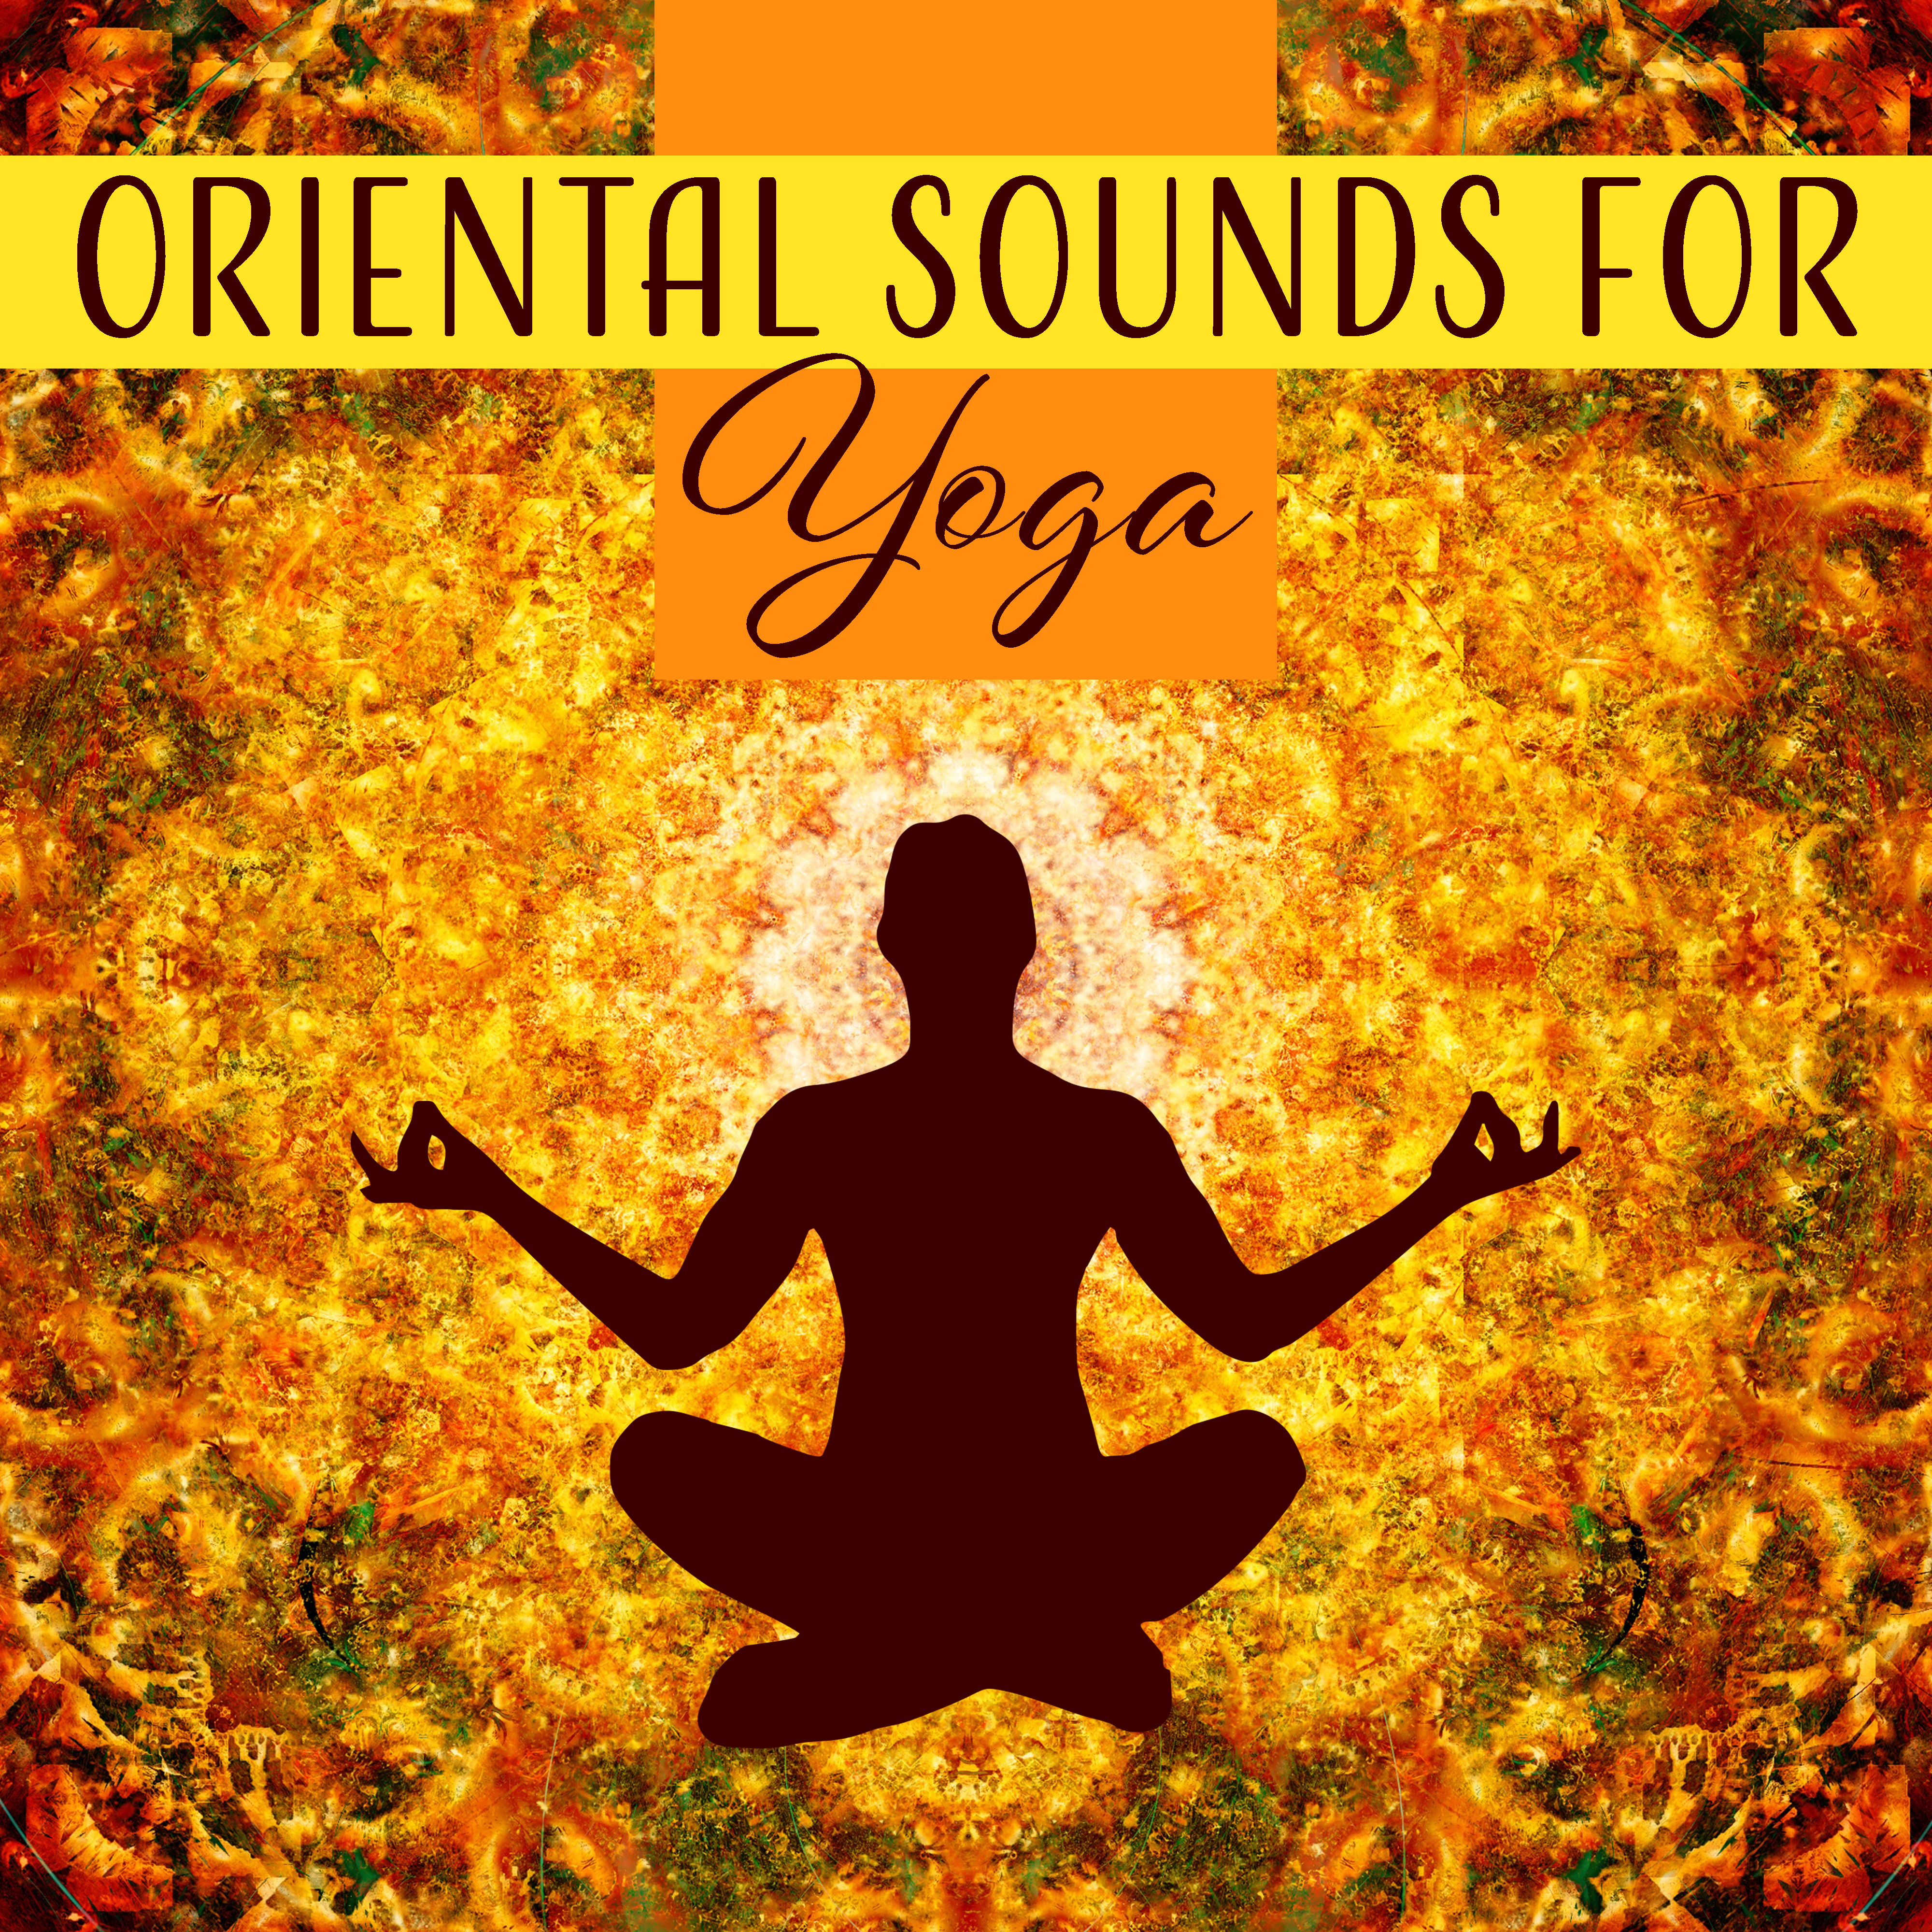 Oriental Sounds for Yoga – Deep Meditation, Peaceful Music for Relaxation, Nature Sounds, Zen Music, Mantra, Spirituality